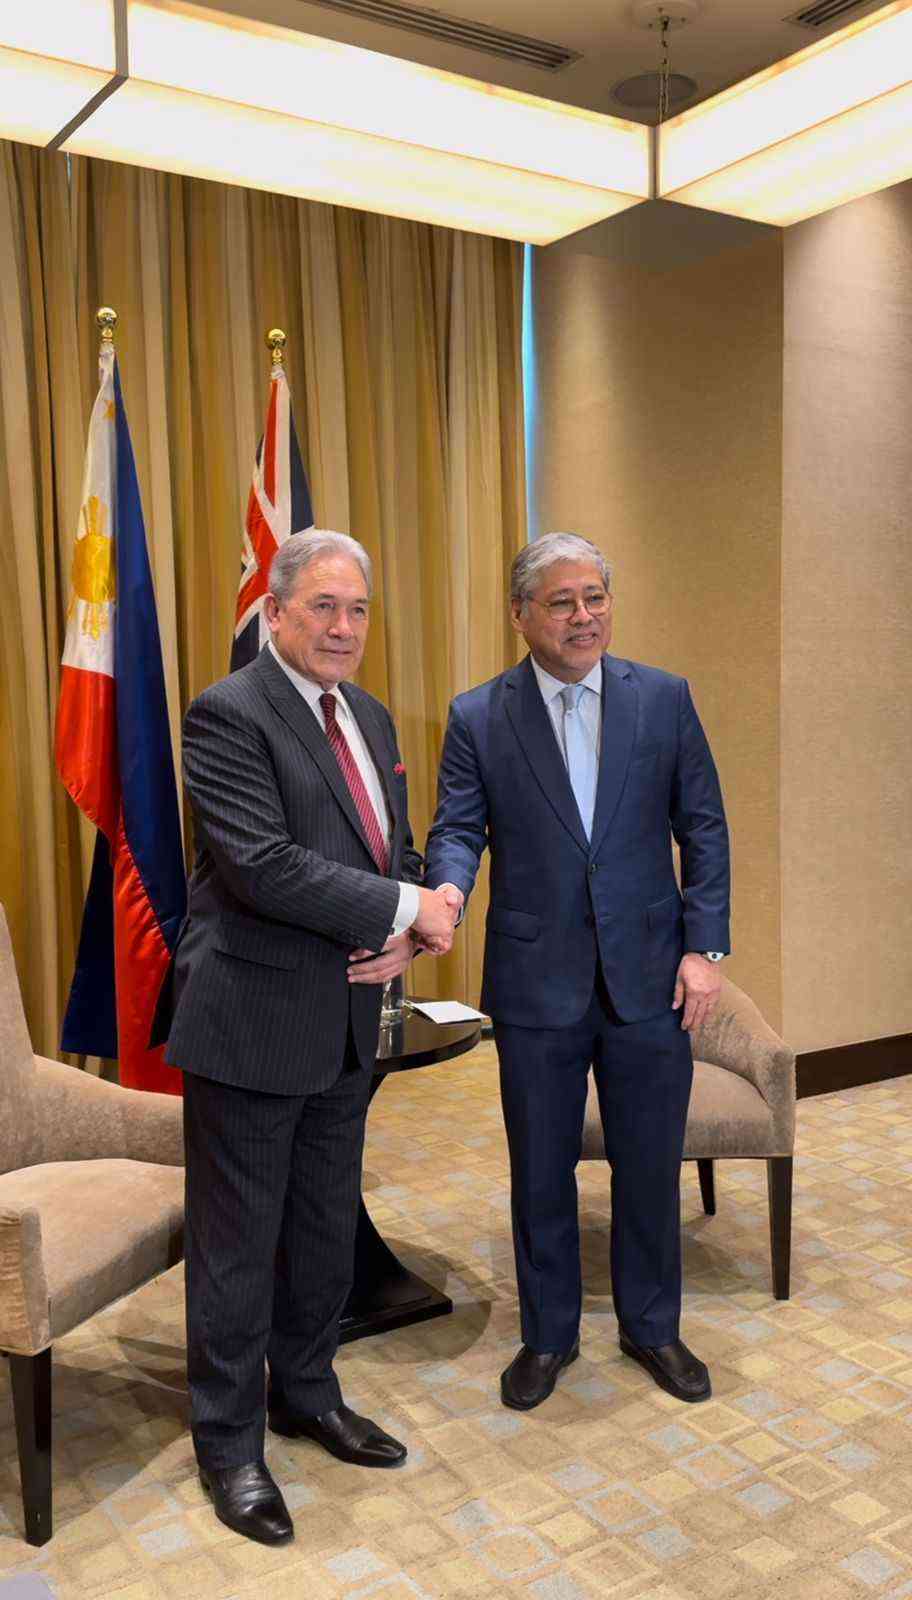 PH, New Zealand welcomes signing of defense cooperation